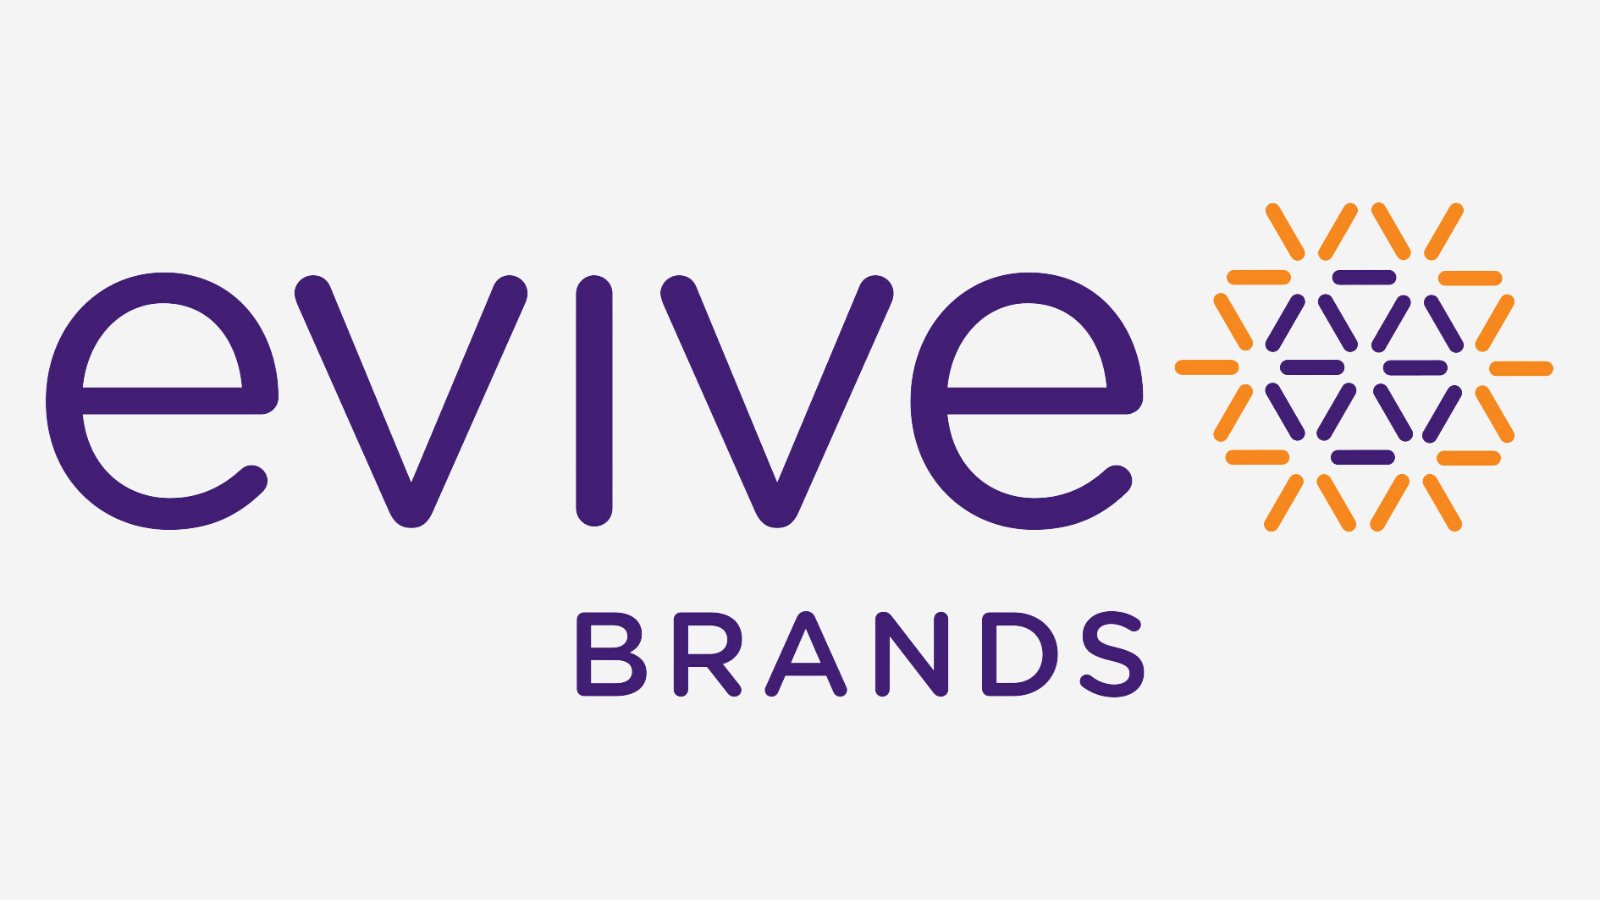 Based in Scottsdale, AZ, Evive Brands, LLC was founded on the values of connection, community and care. The company’s premier franchise brands include Executive Home Care, one of the nation's leading in-home care providers; Assisted Living Locators, a nationally acclaimed senior placement and referral agency; and Grasons Co., a respected estate sales and business liquidation service, which together include more than 200 franchise locations across the U.S. With private equity investment from Th